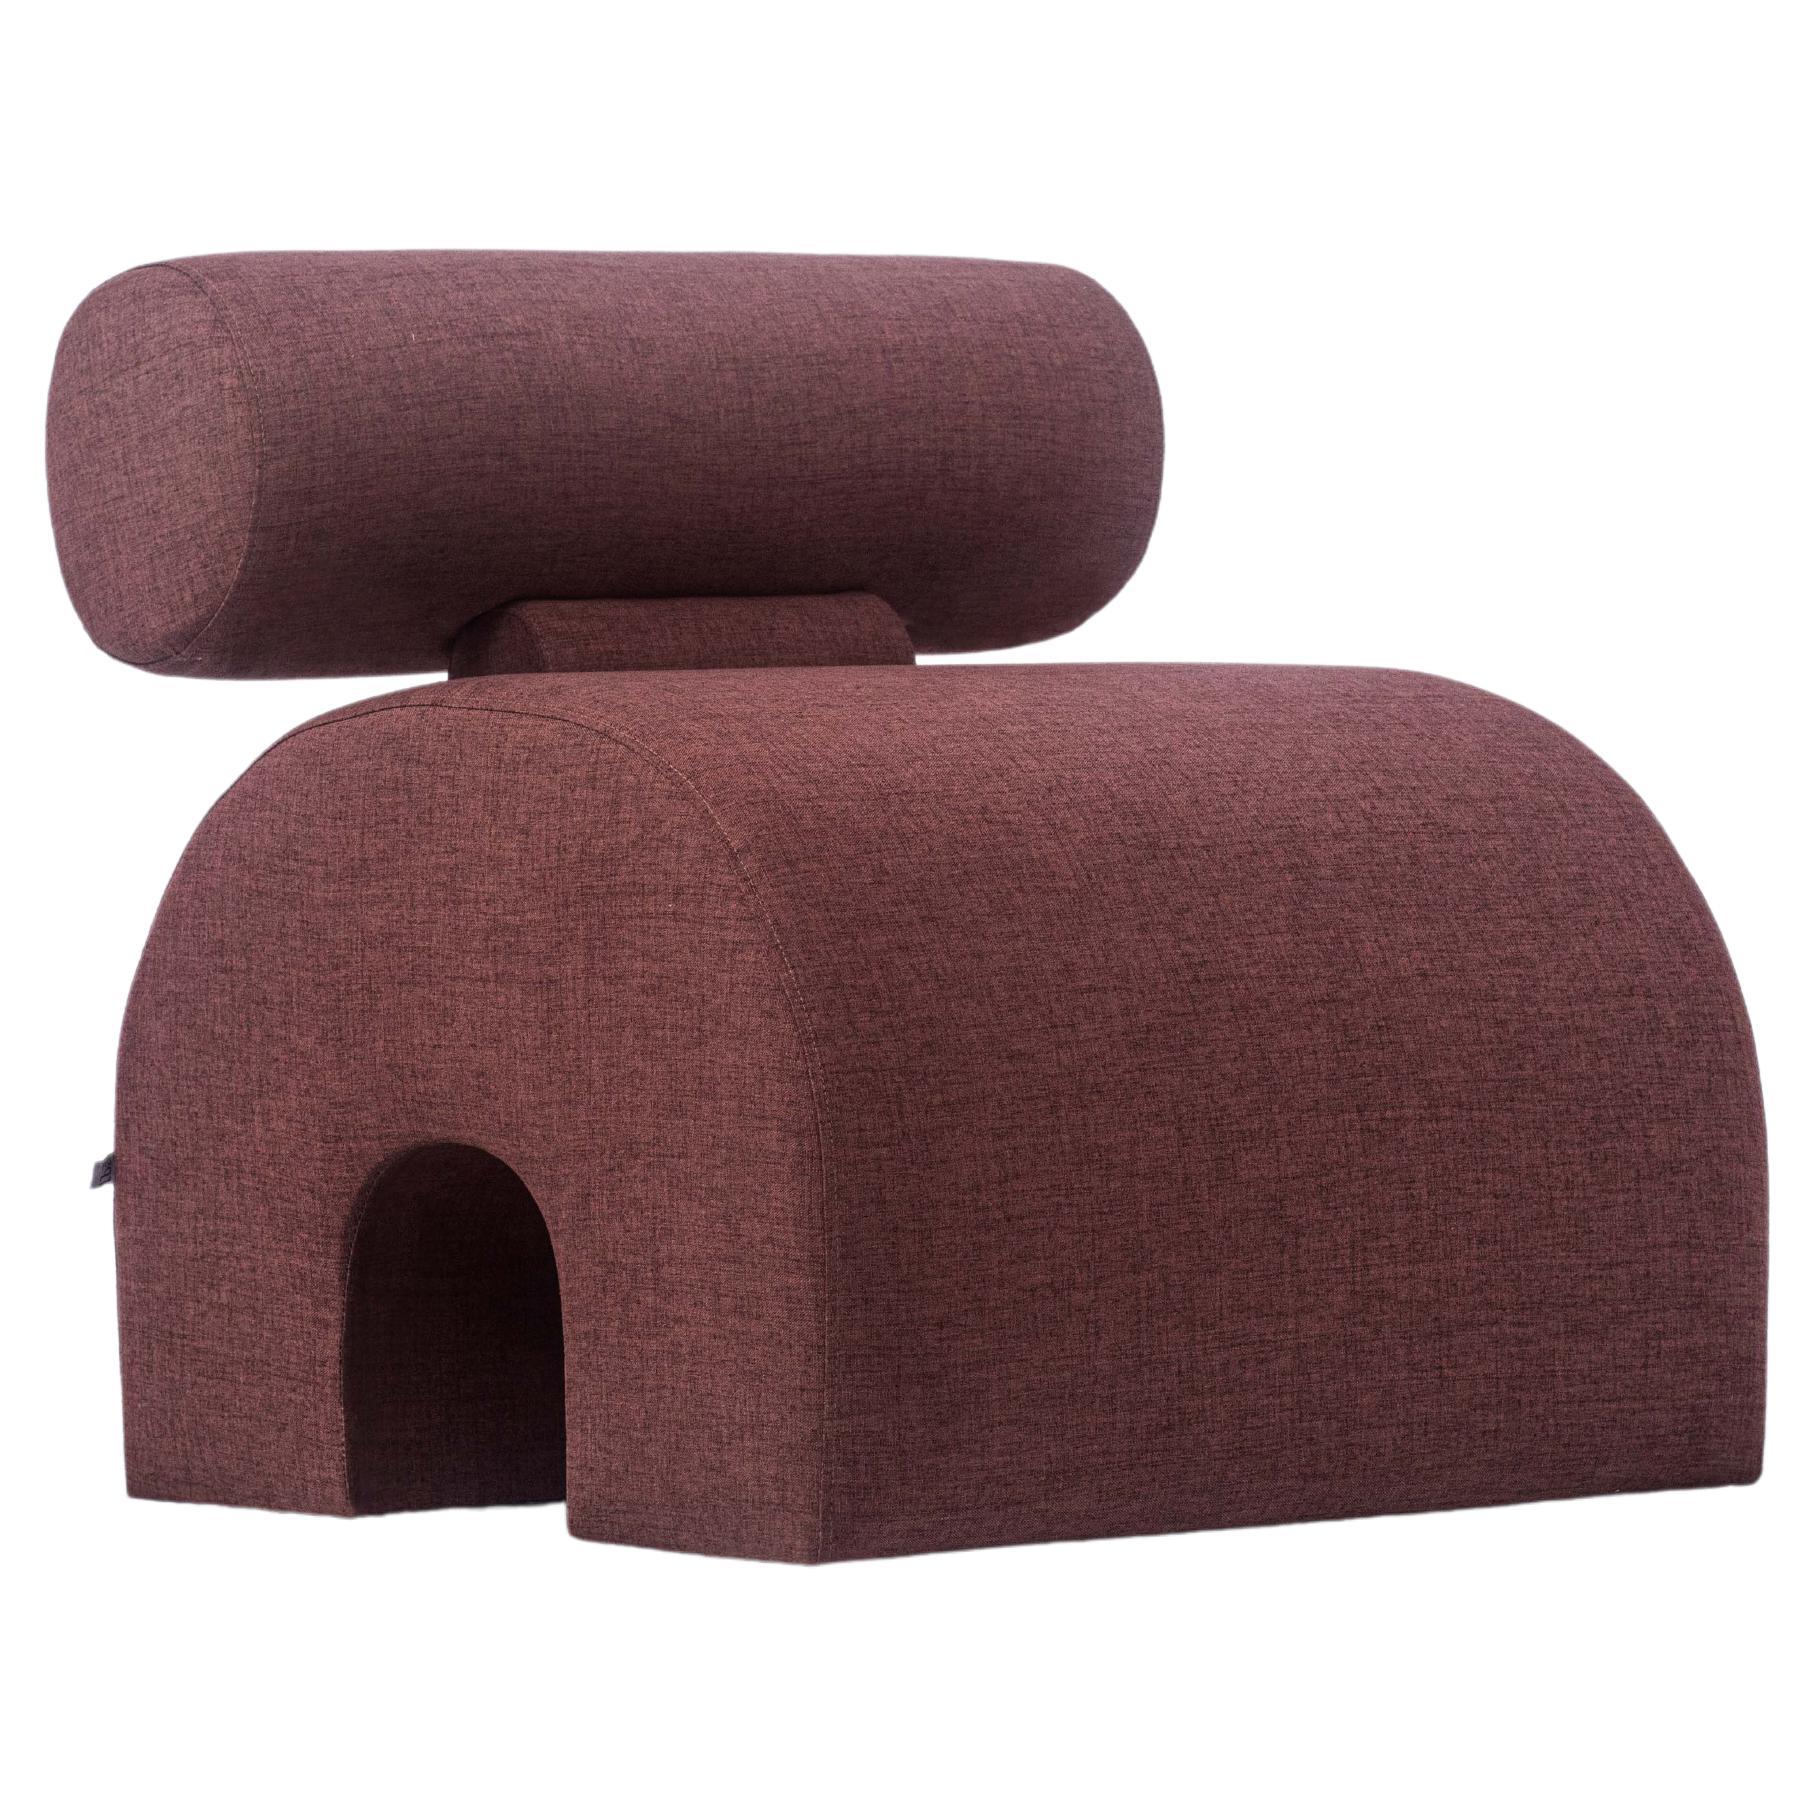 Modern Lounge Chair / Slipper Chair in Berry Color